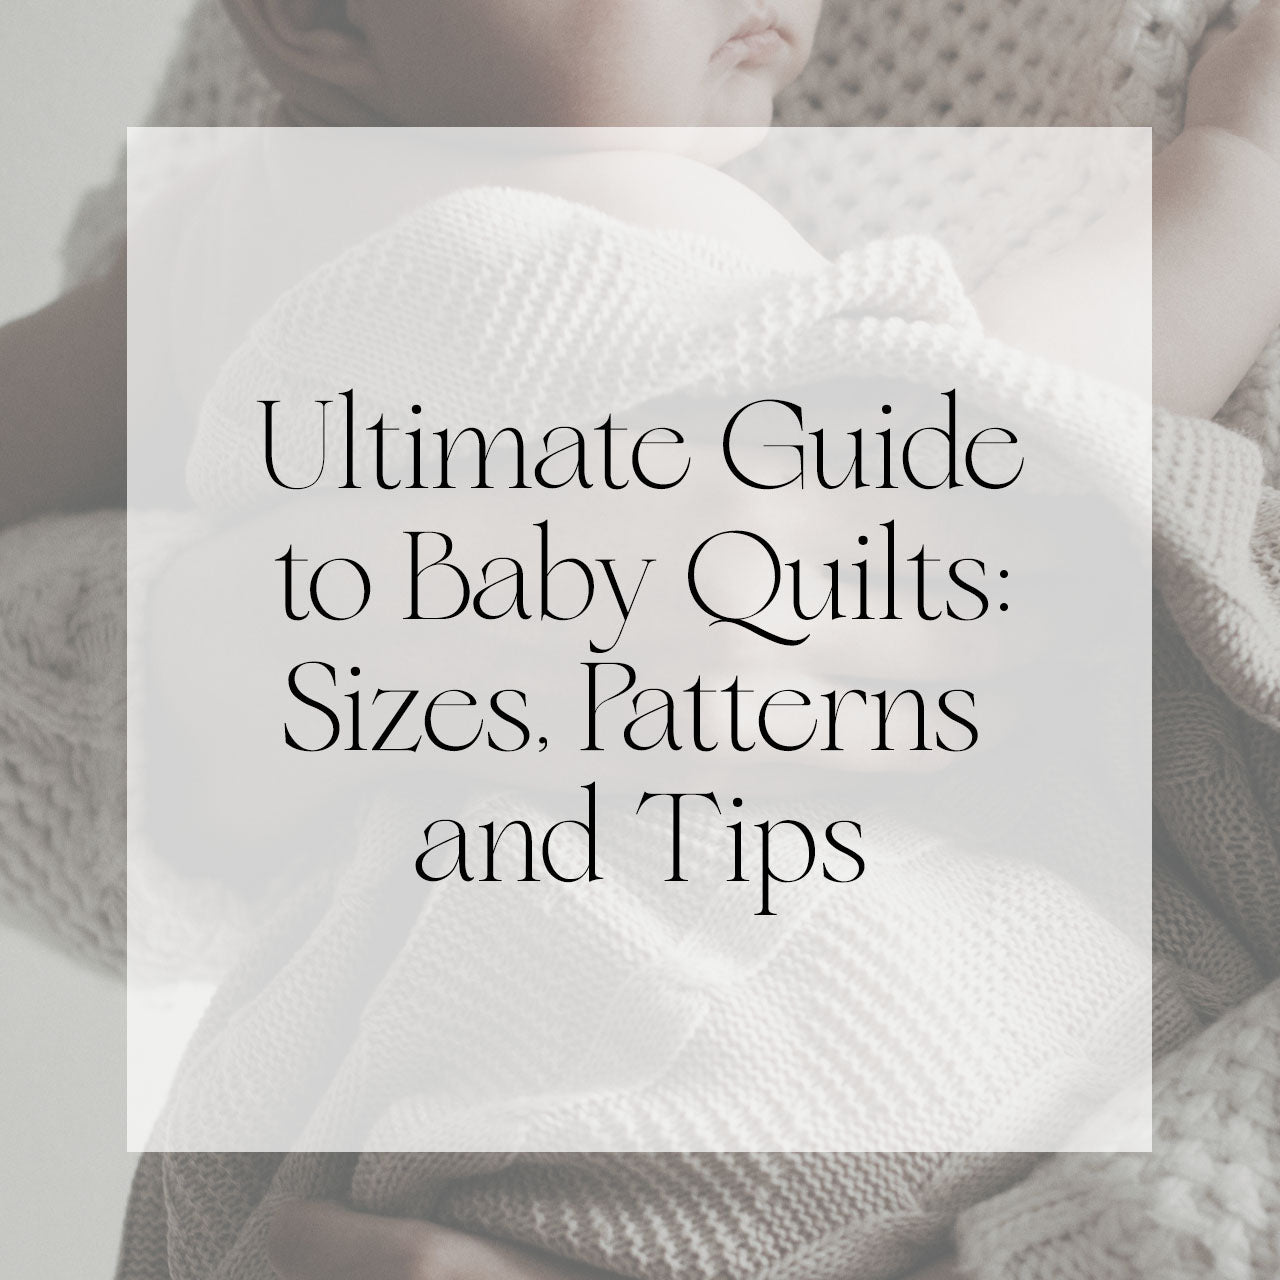 Ultimate Guide to Baby Quilts: Sizes, Patterns and Tips